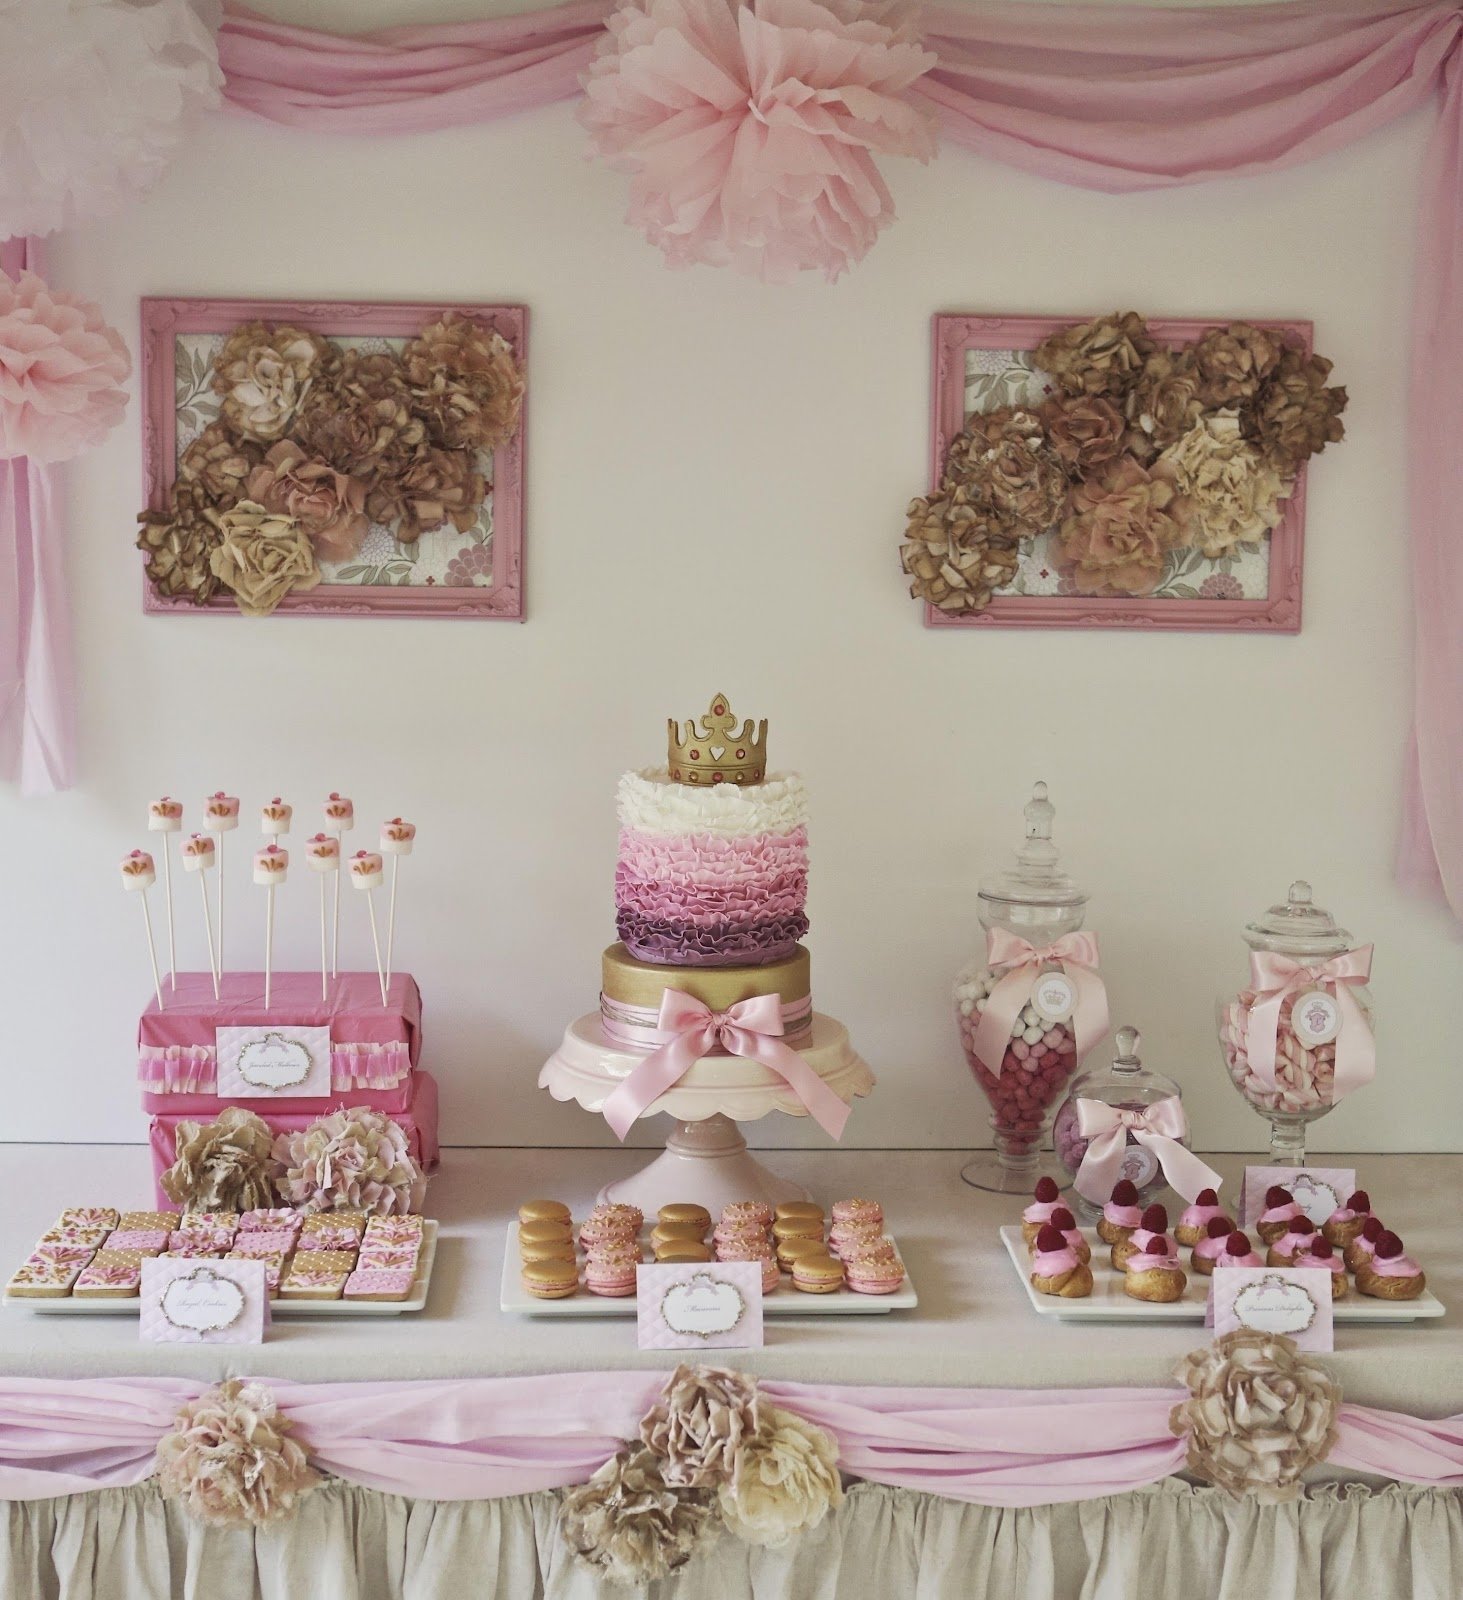 10 Perfect Princess Party Ideas For 5 Year Old 5 year old birthday girl party ideas chic princess 8th 3 2023